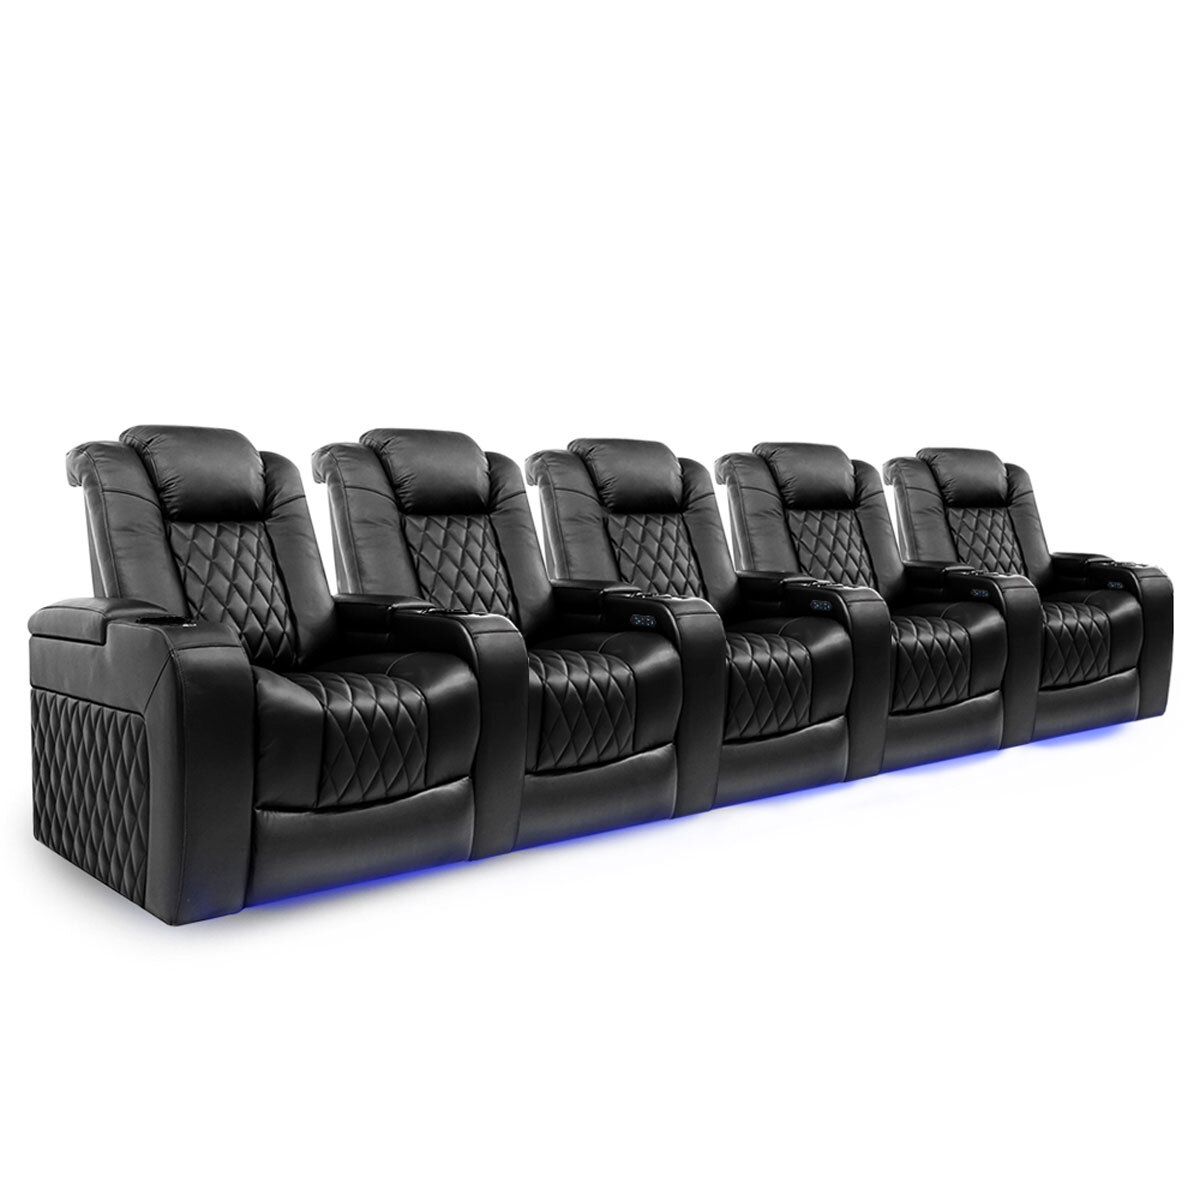 Valencia Home Theatre Seating Tuscany Row of 5 Chairs, Black